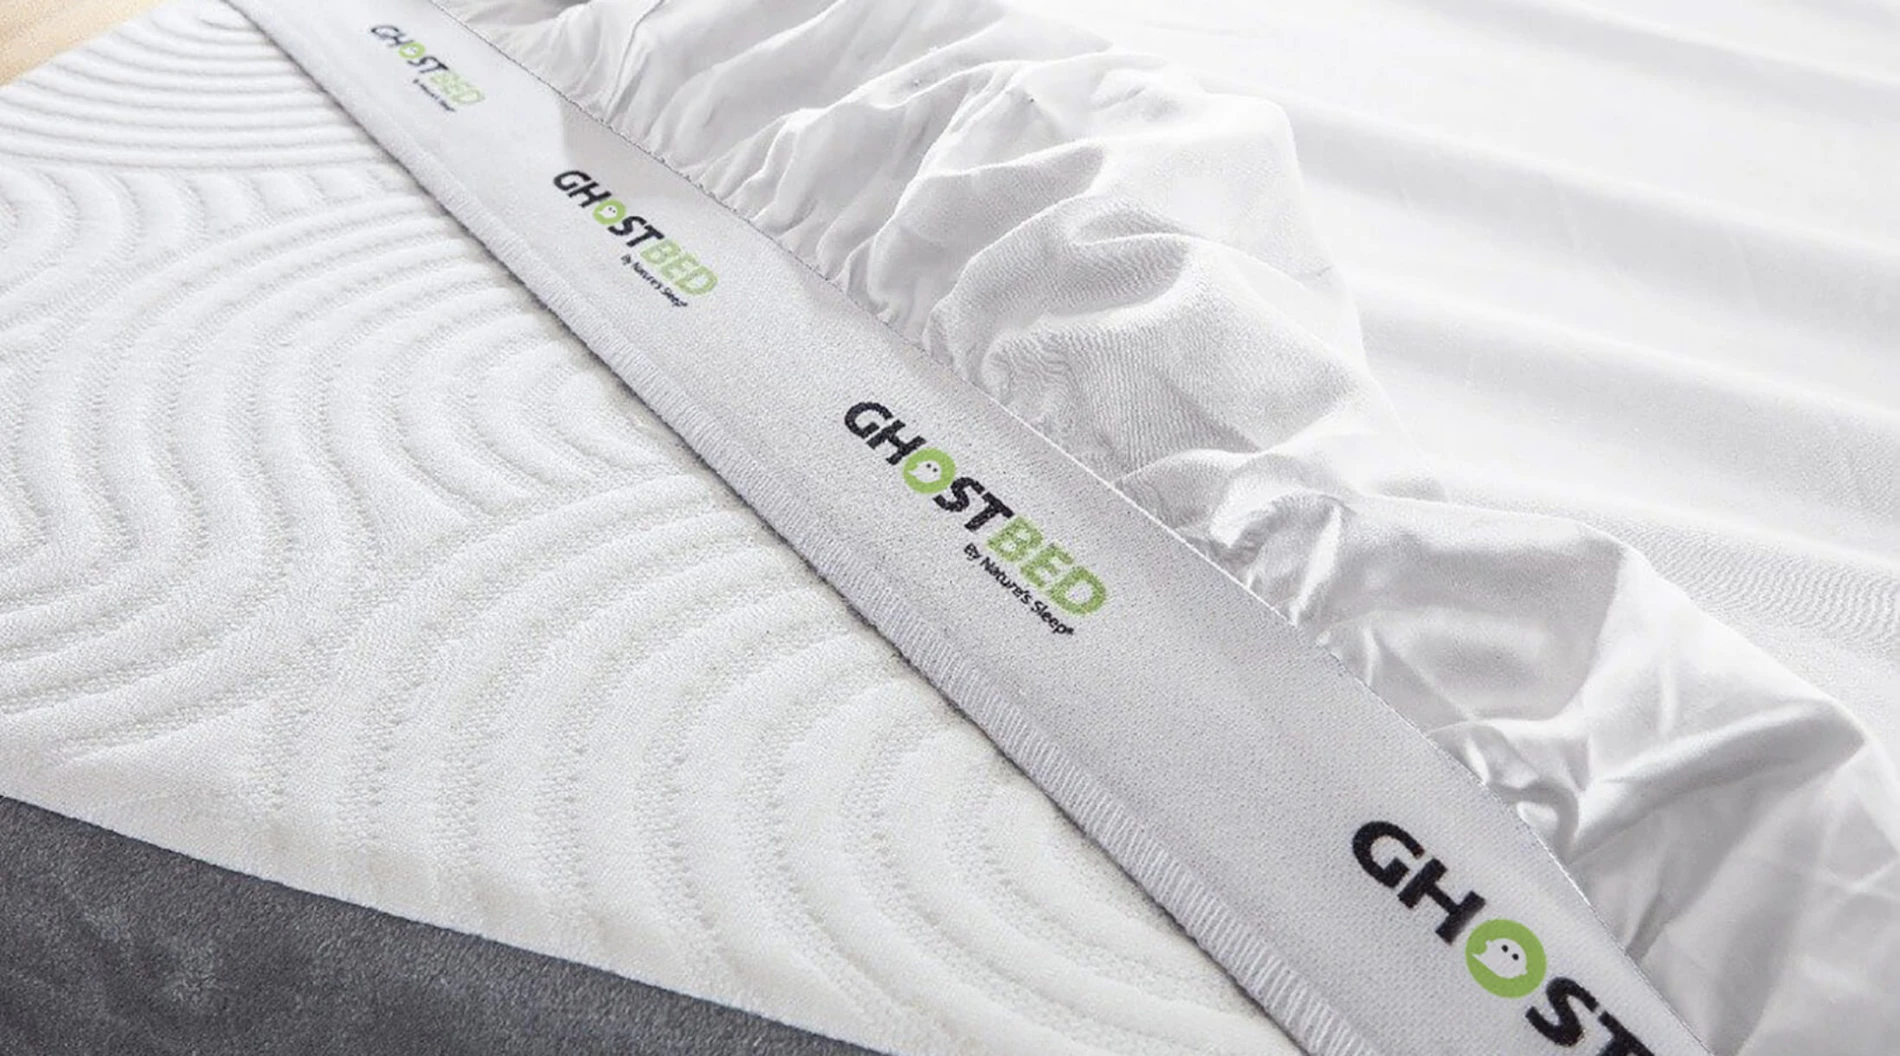 Split king sheets by GhostBed in white.